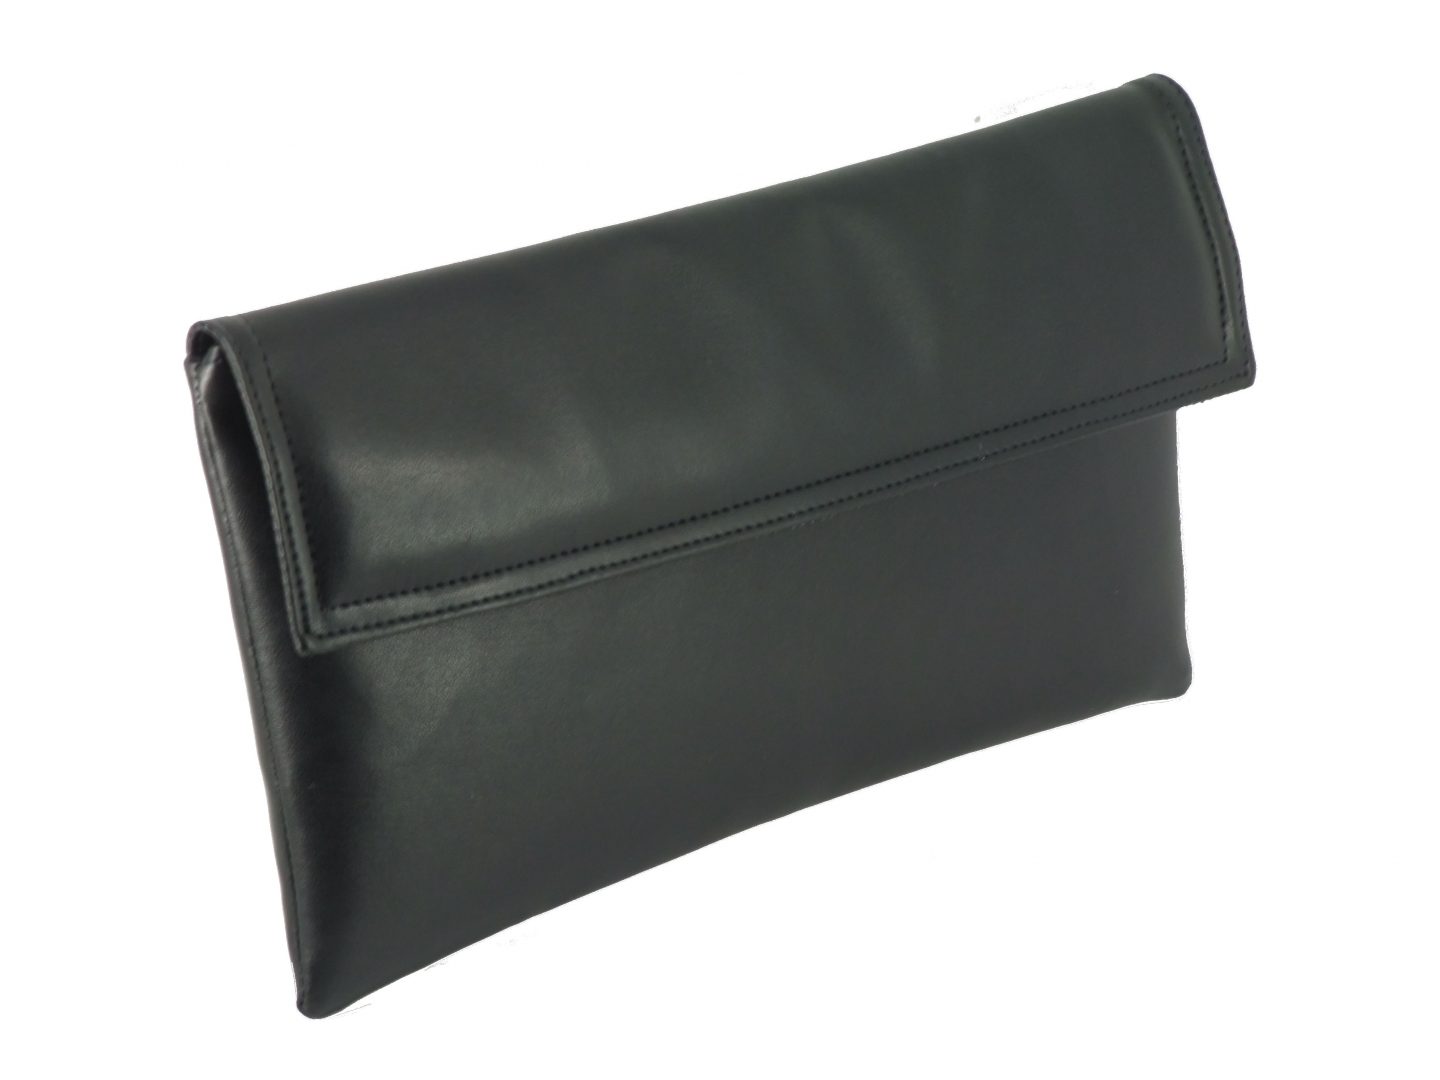 LONI British Hand Made Chic Faux Leather Clutch / Shoulder Bag with ...